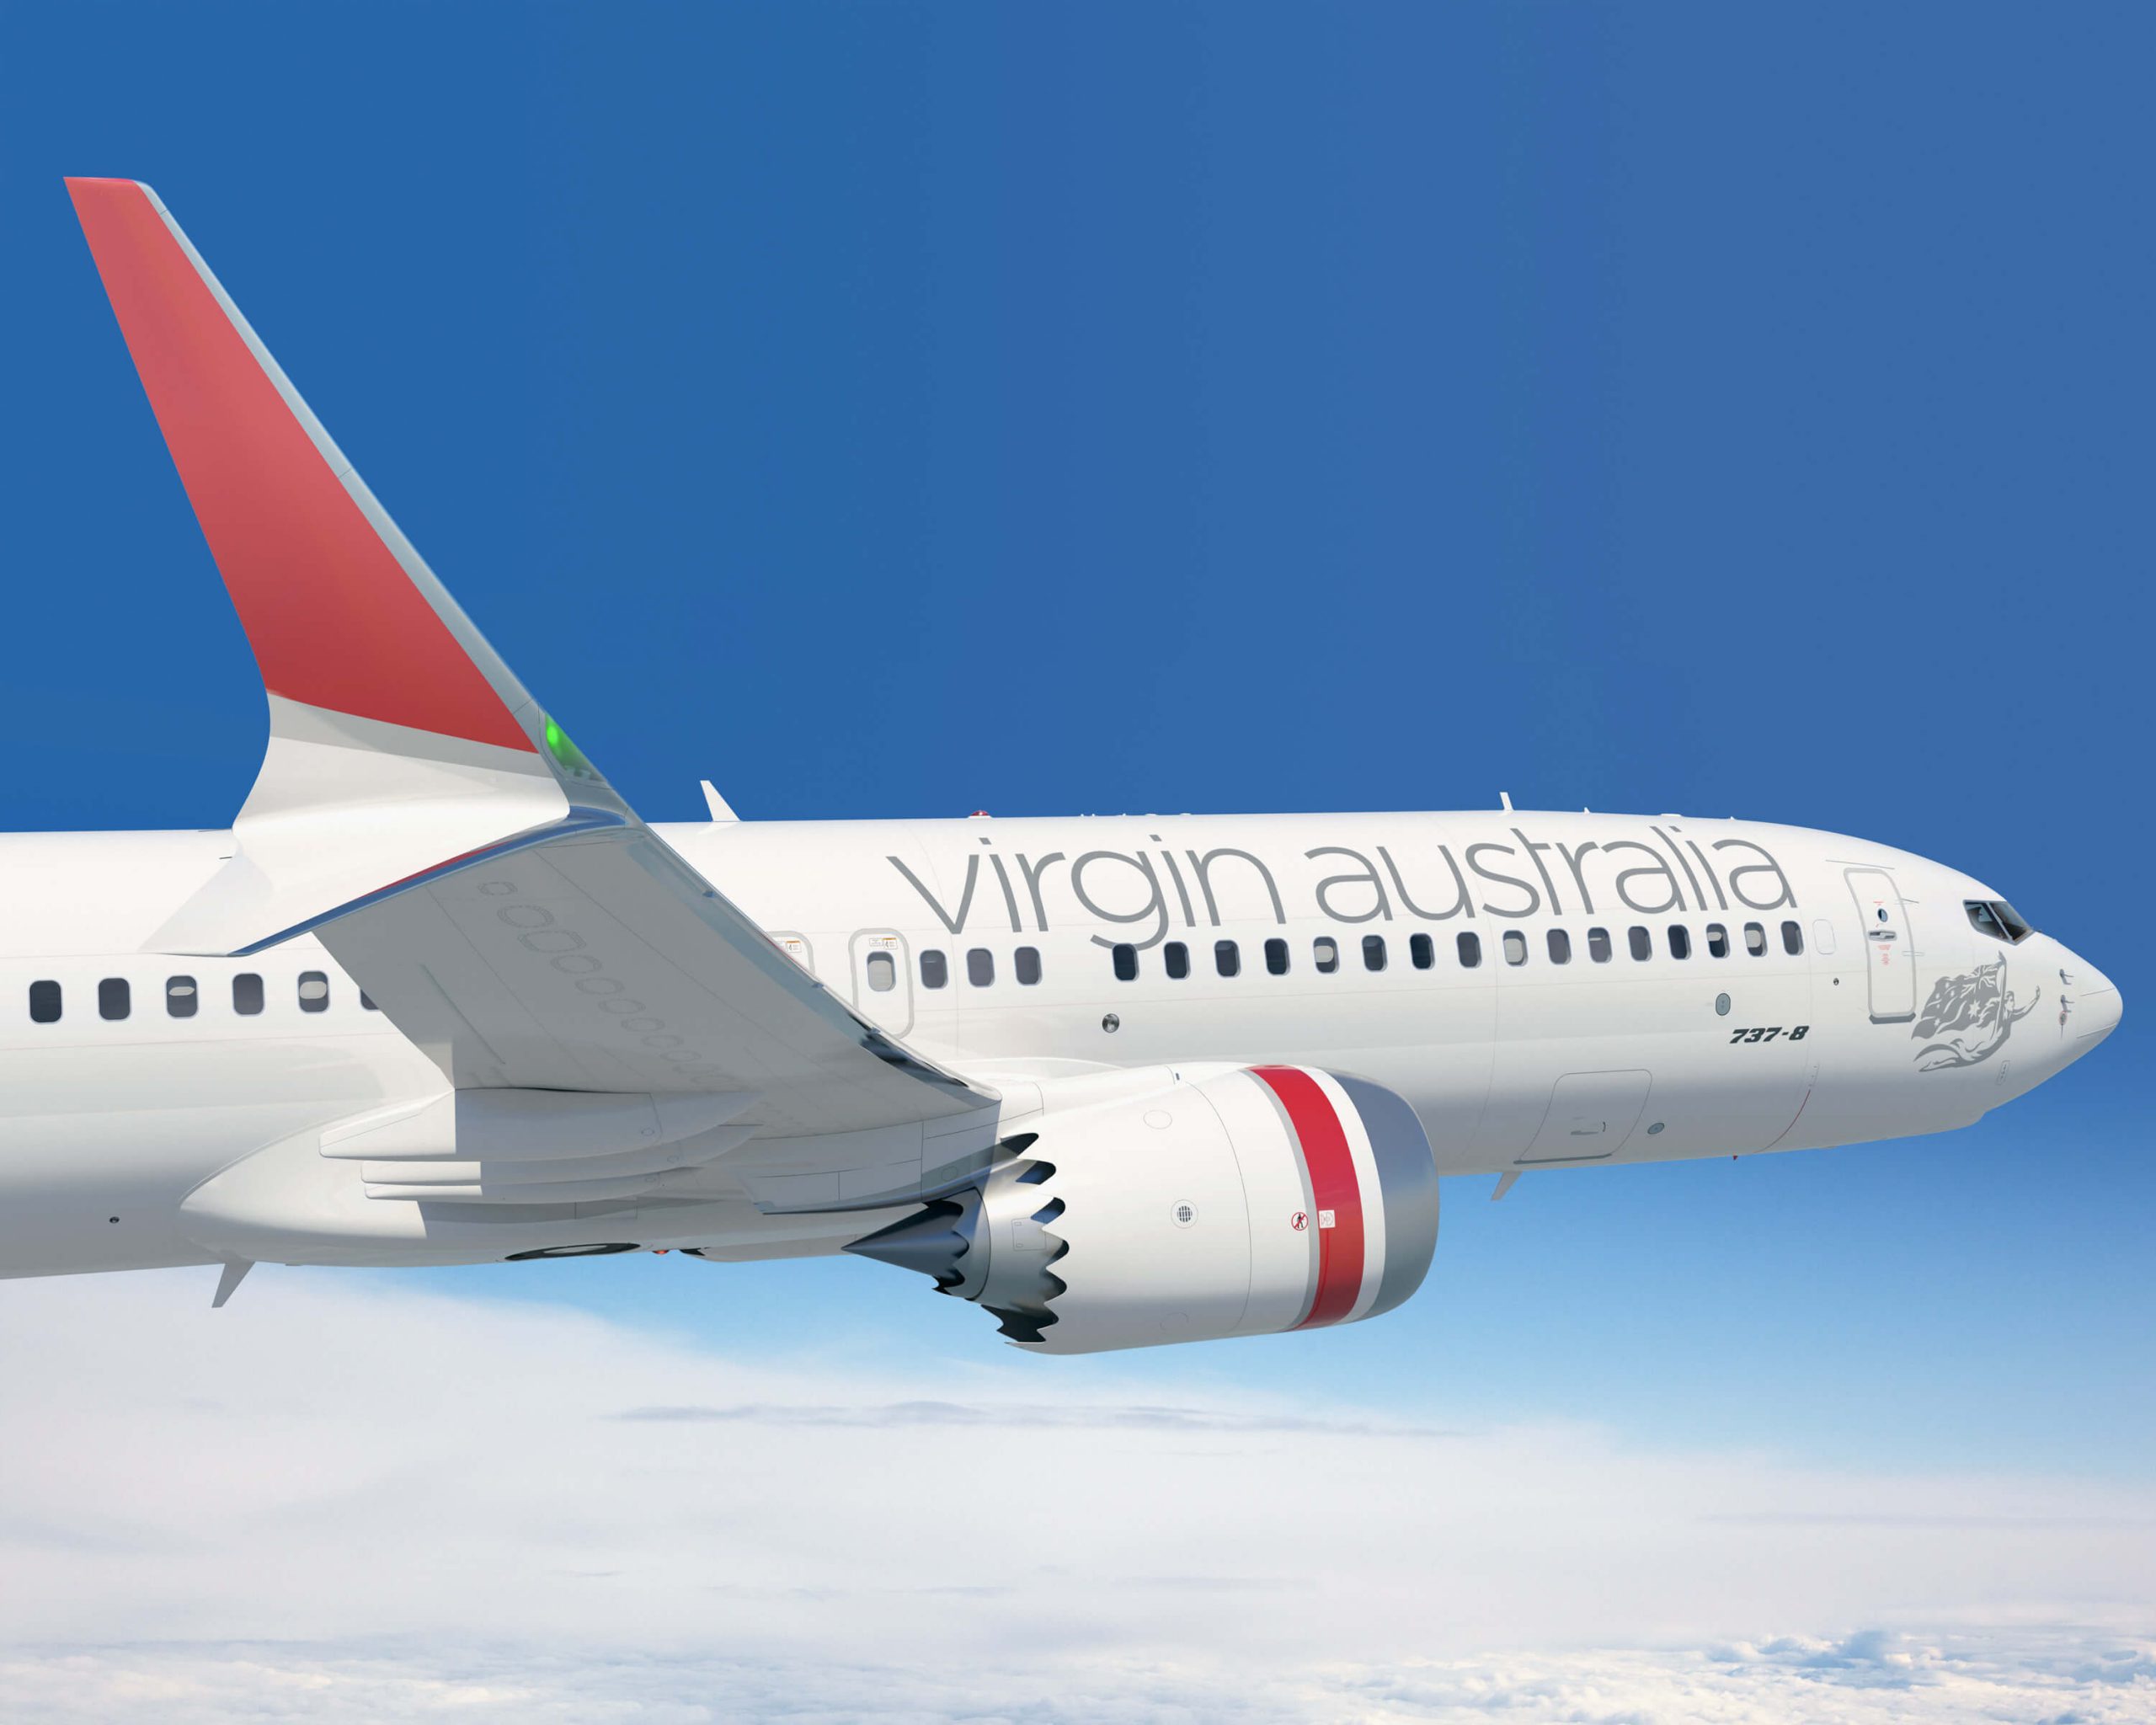 Virgin Australia Group appoints Paul Scurrah as CEO and Managing Director